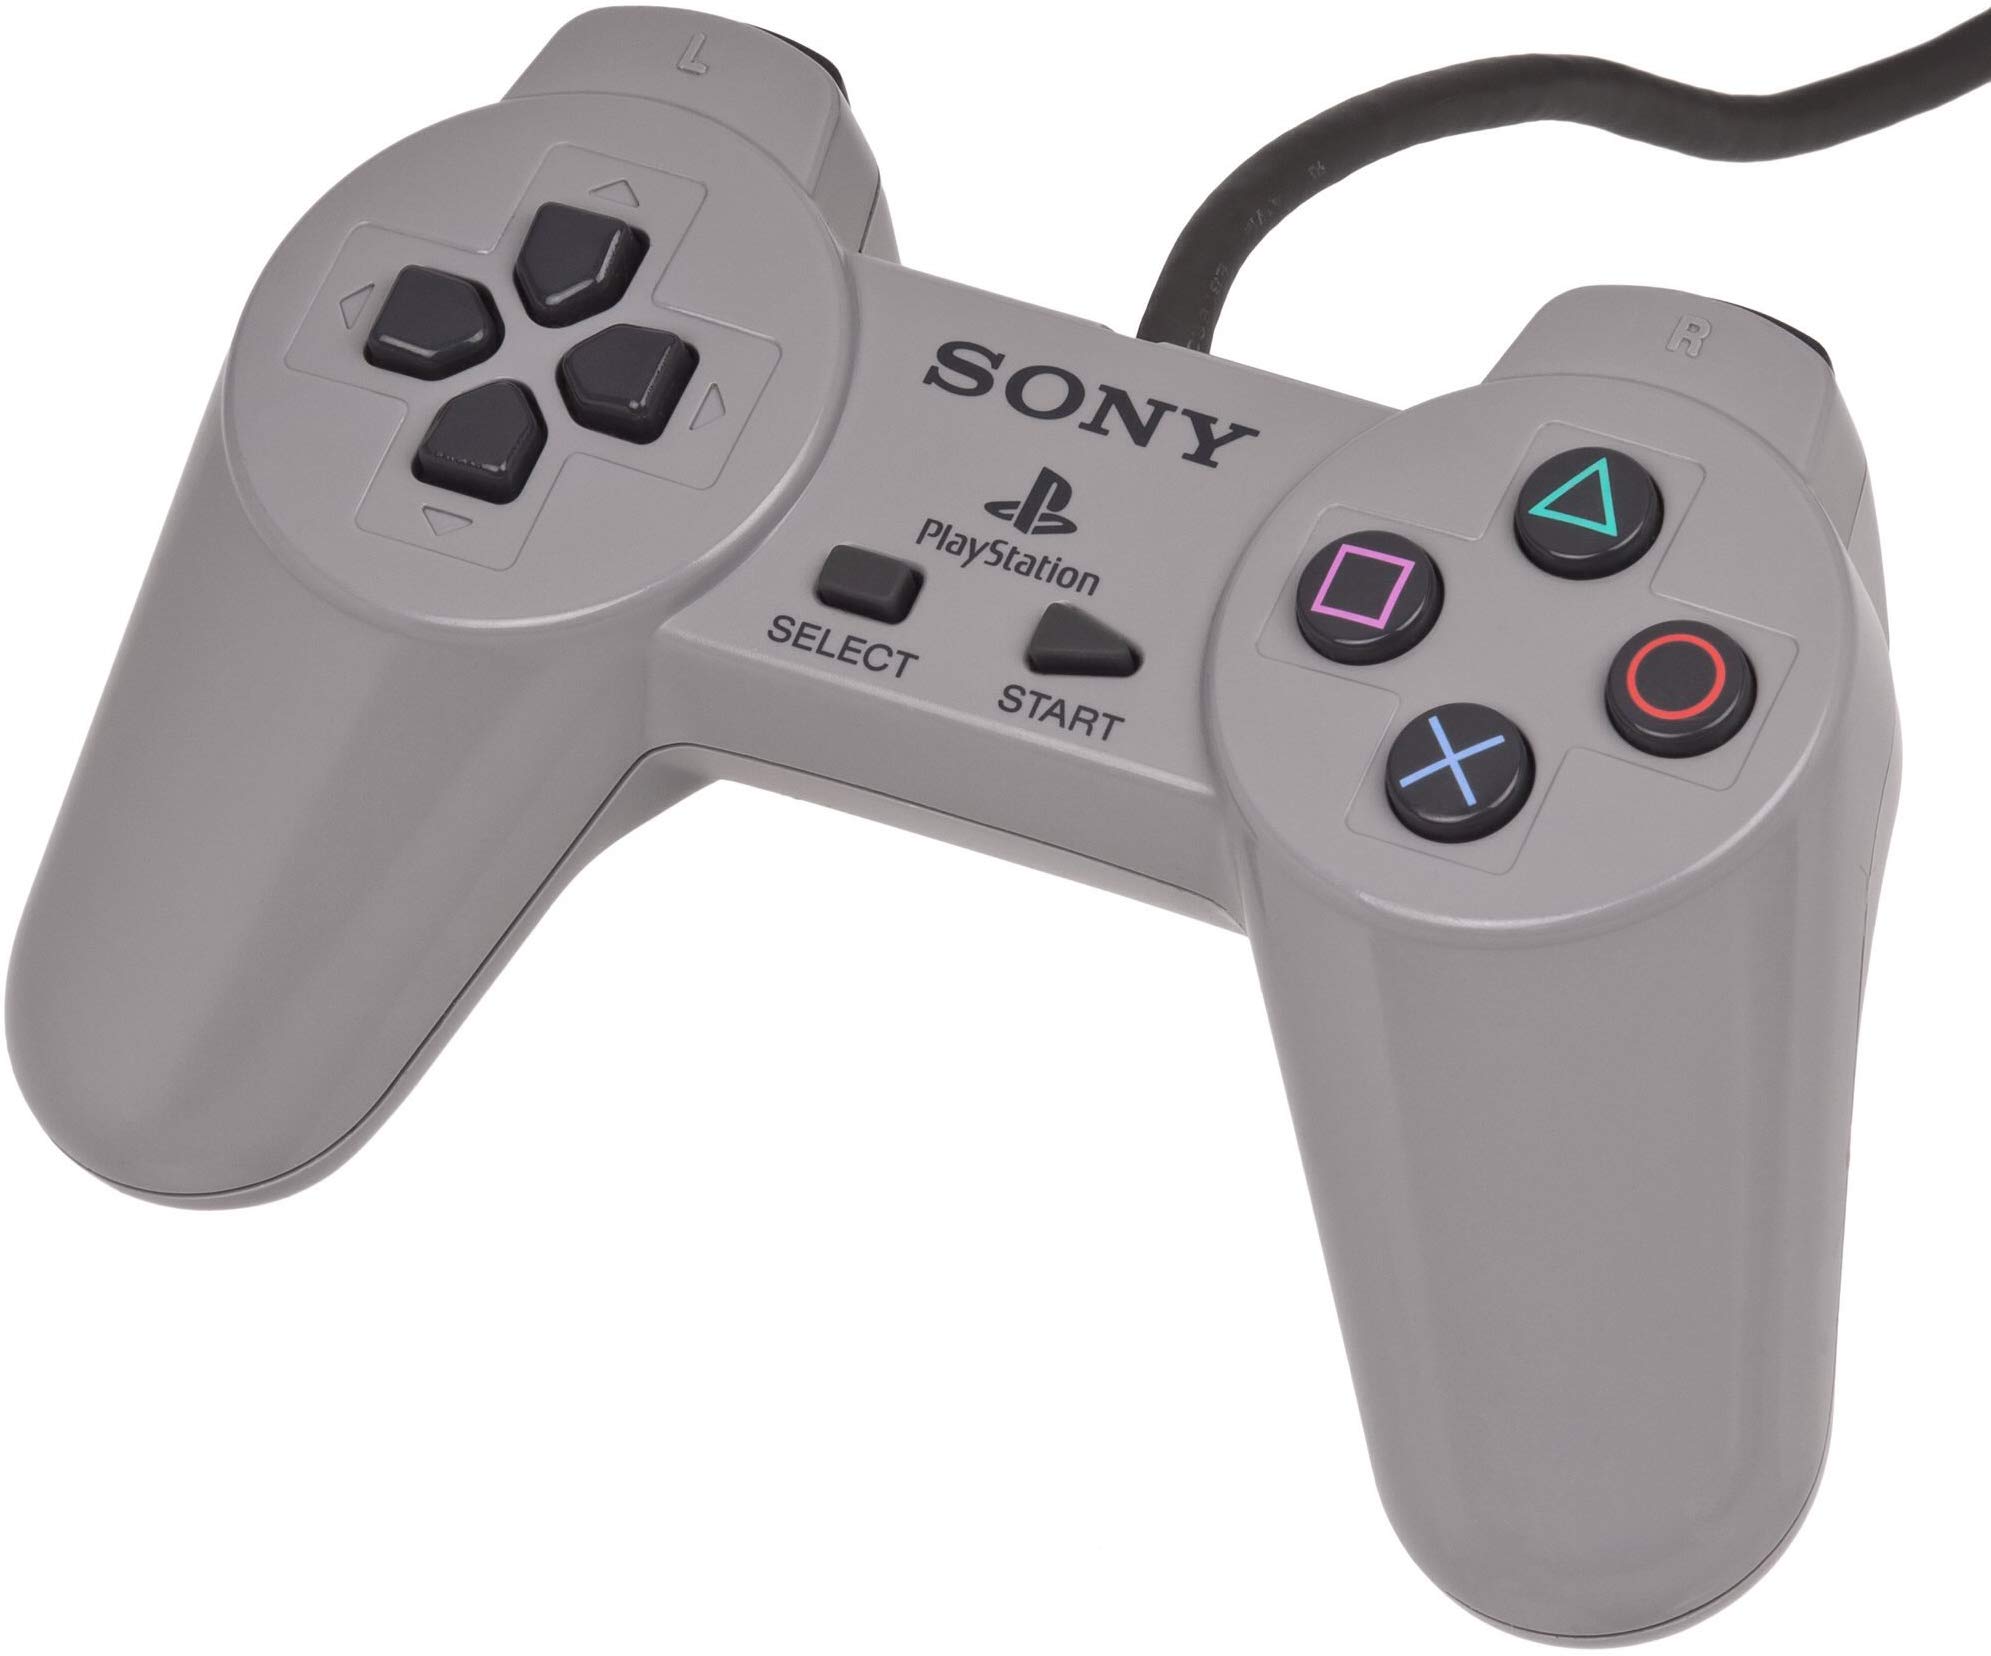 PlayStation 1 Controller